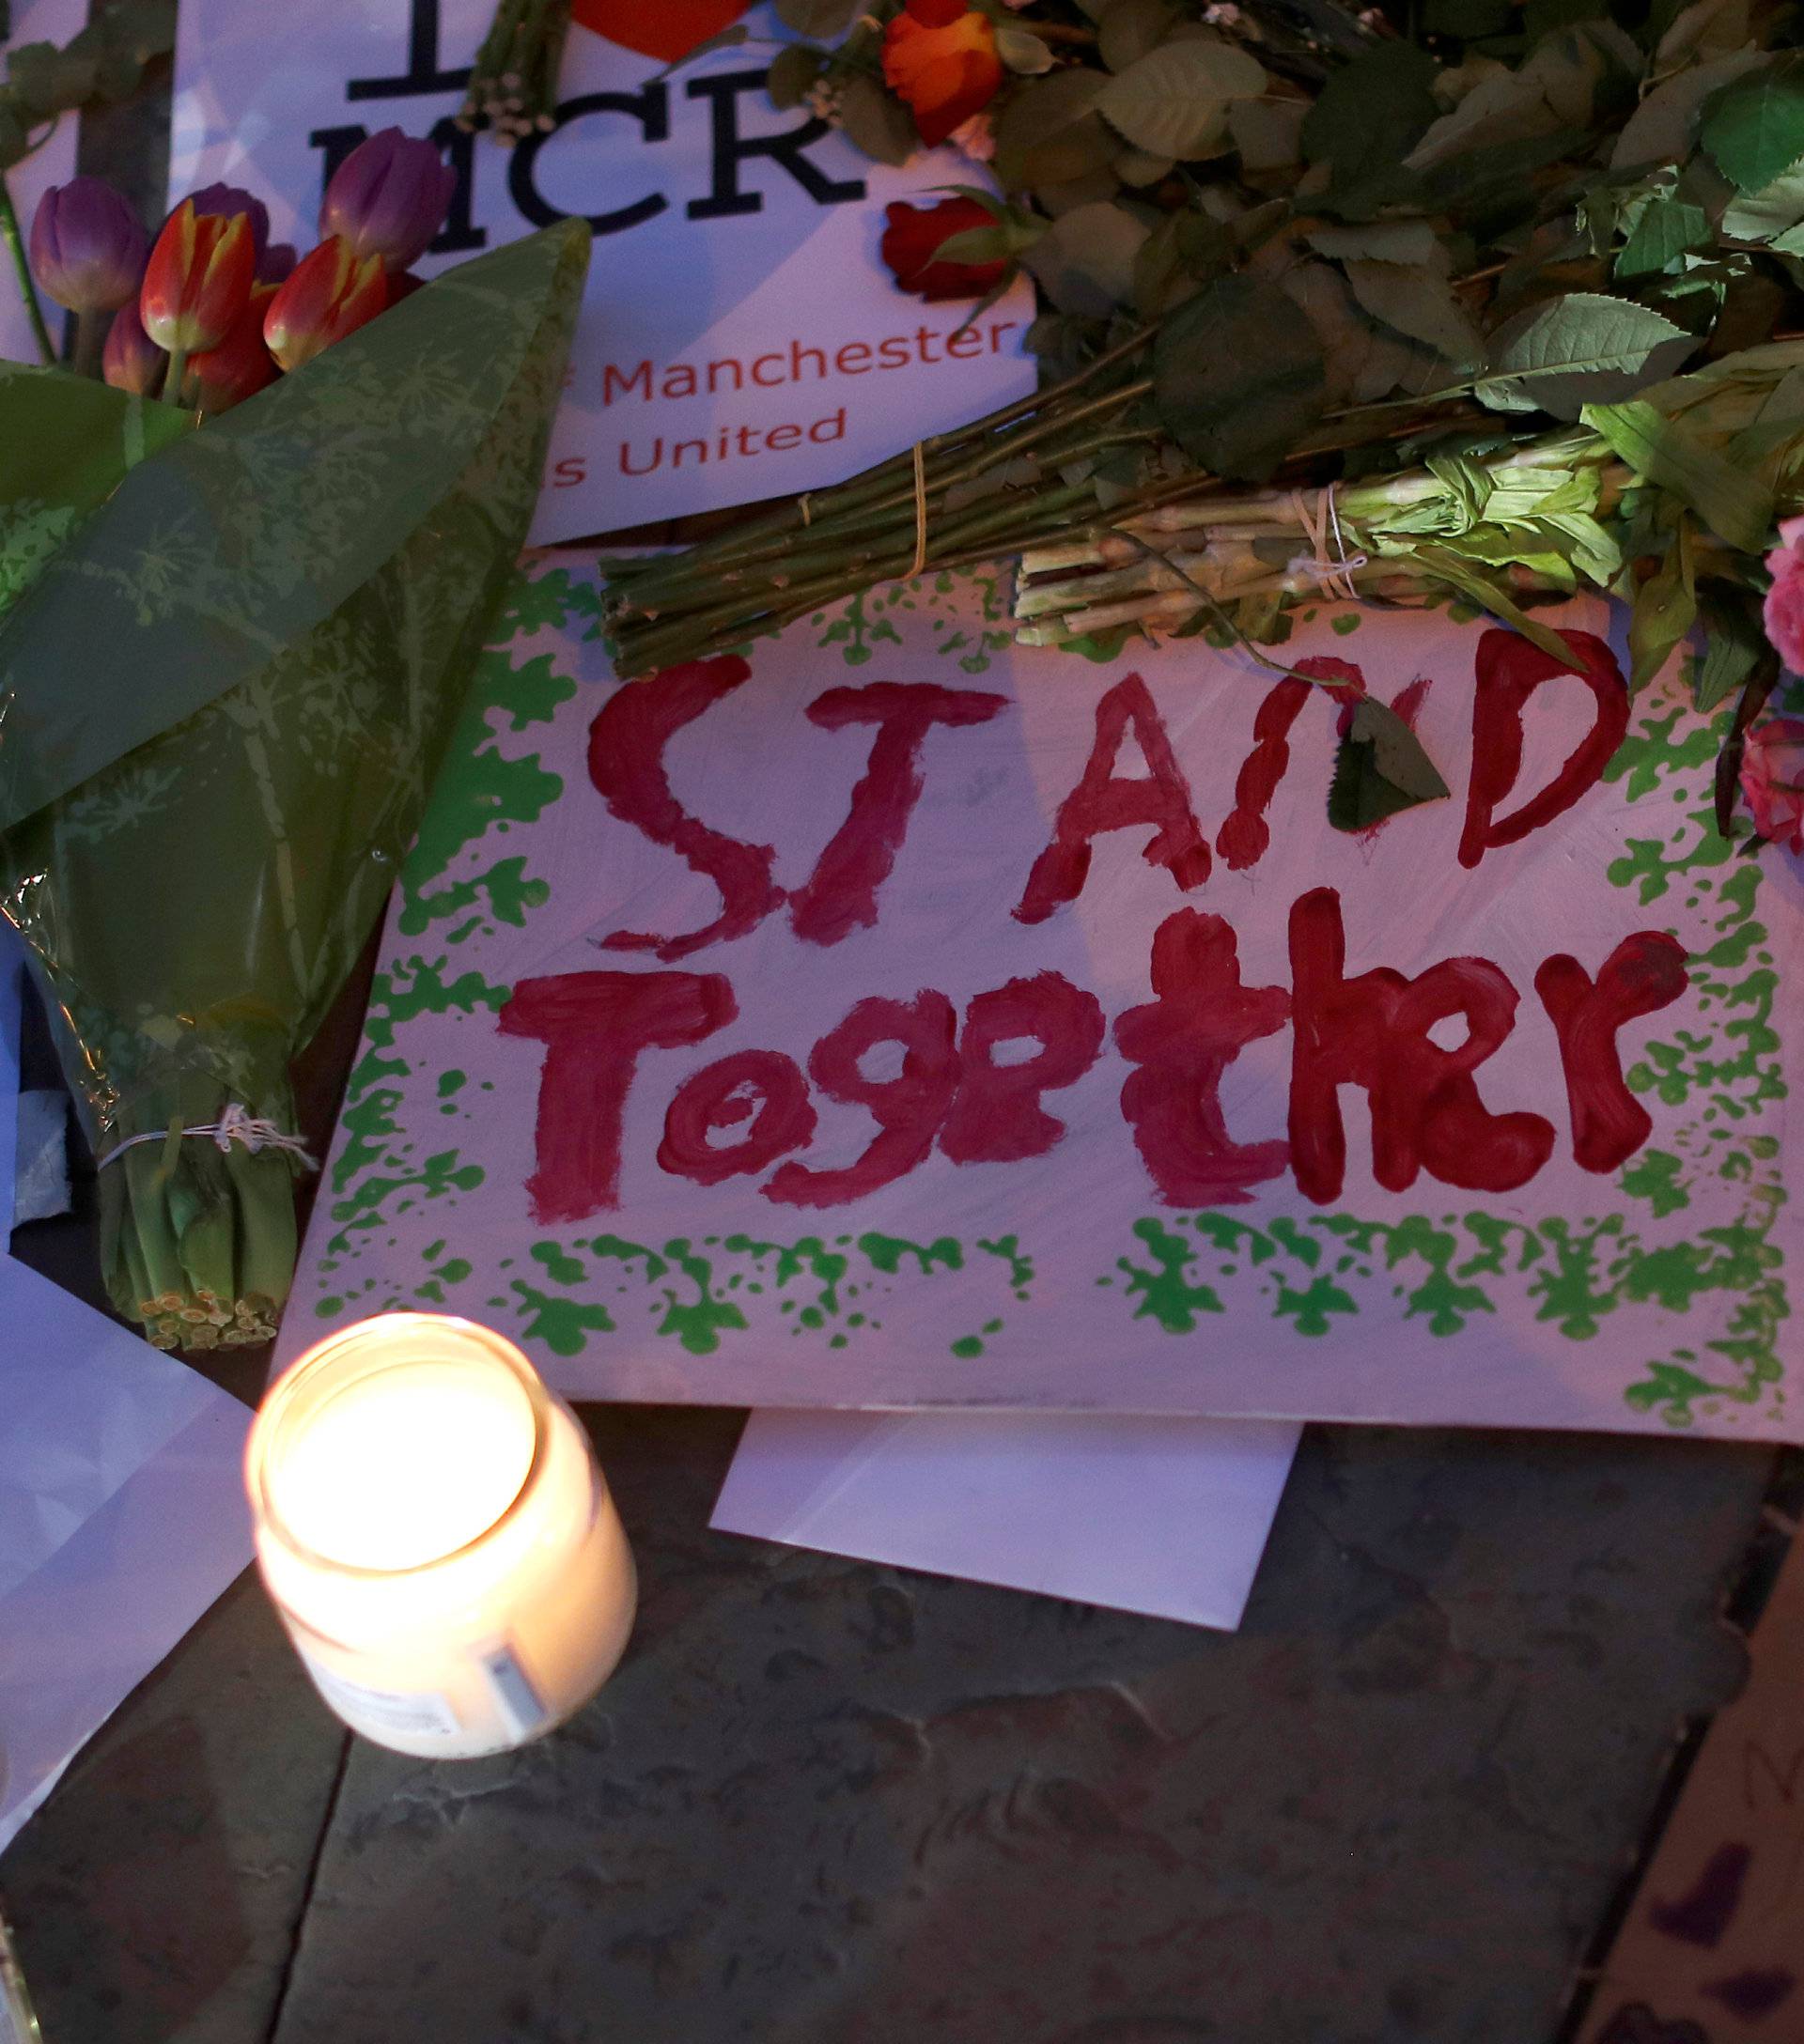 Candles and messages of solidarity are seen following a vigil in central Manchester